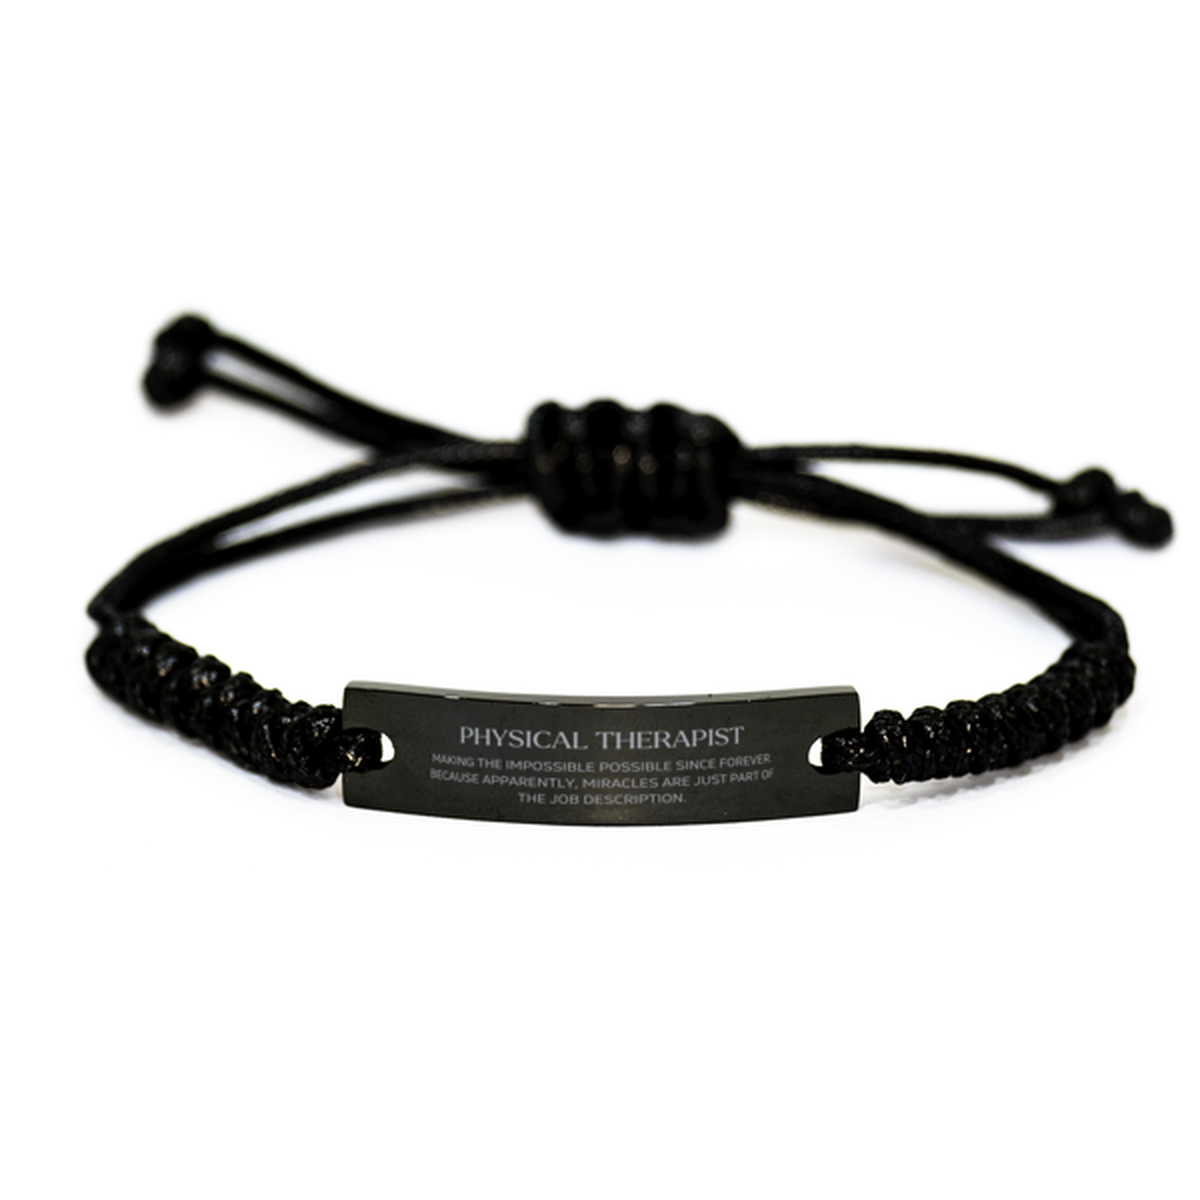 Funny Physical Therapist Gifts, Miracles are just part of the job description, Inspirational Birthday Black Rope Bracelet For Physical Therapist, Men, Women, Coworkers, Friends, Boss